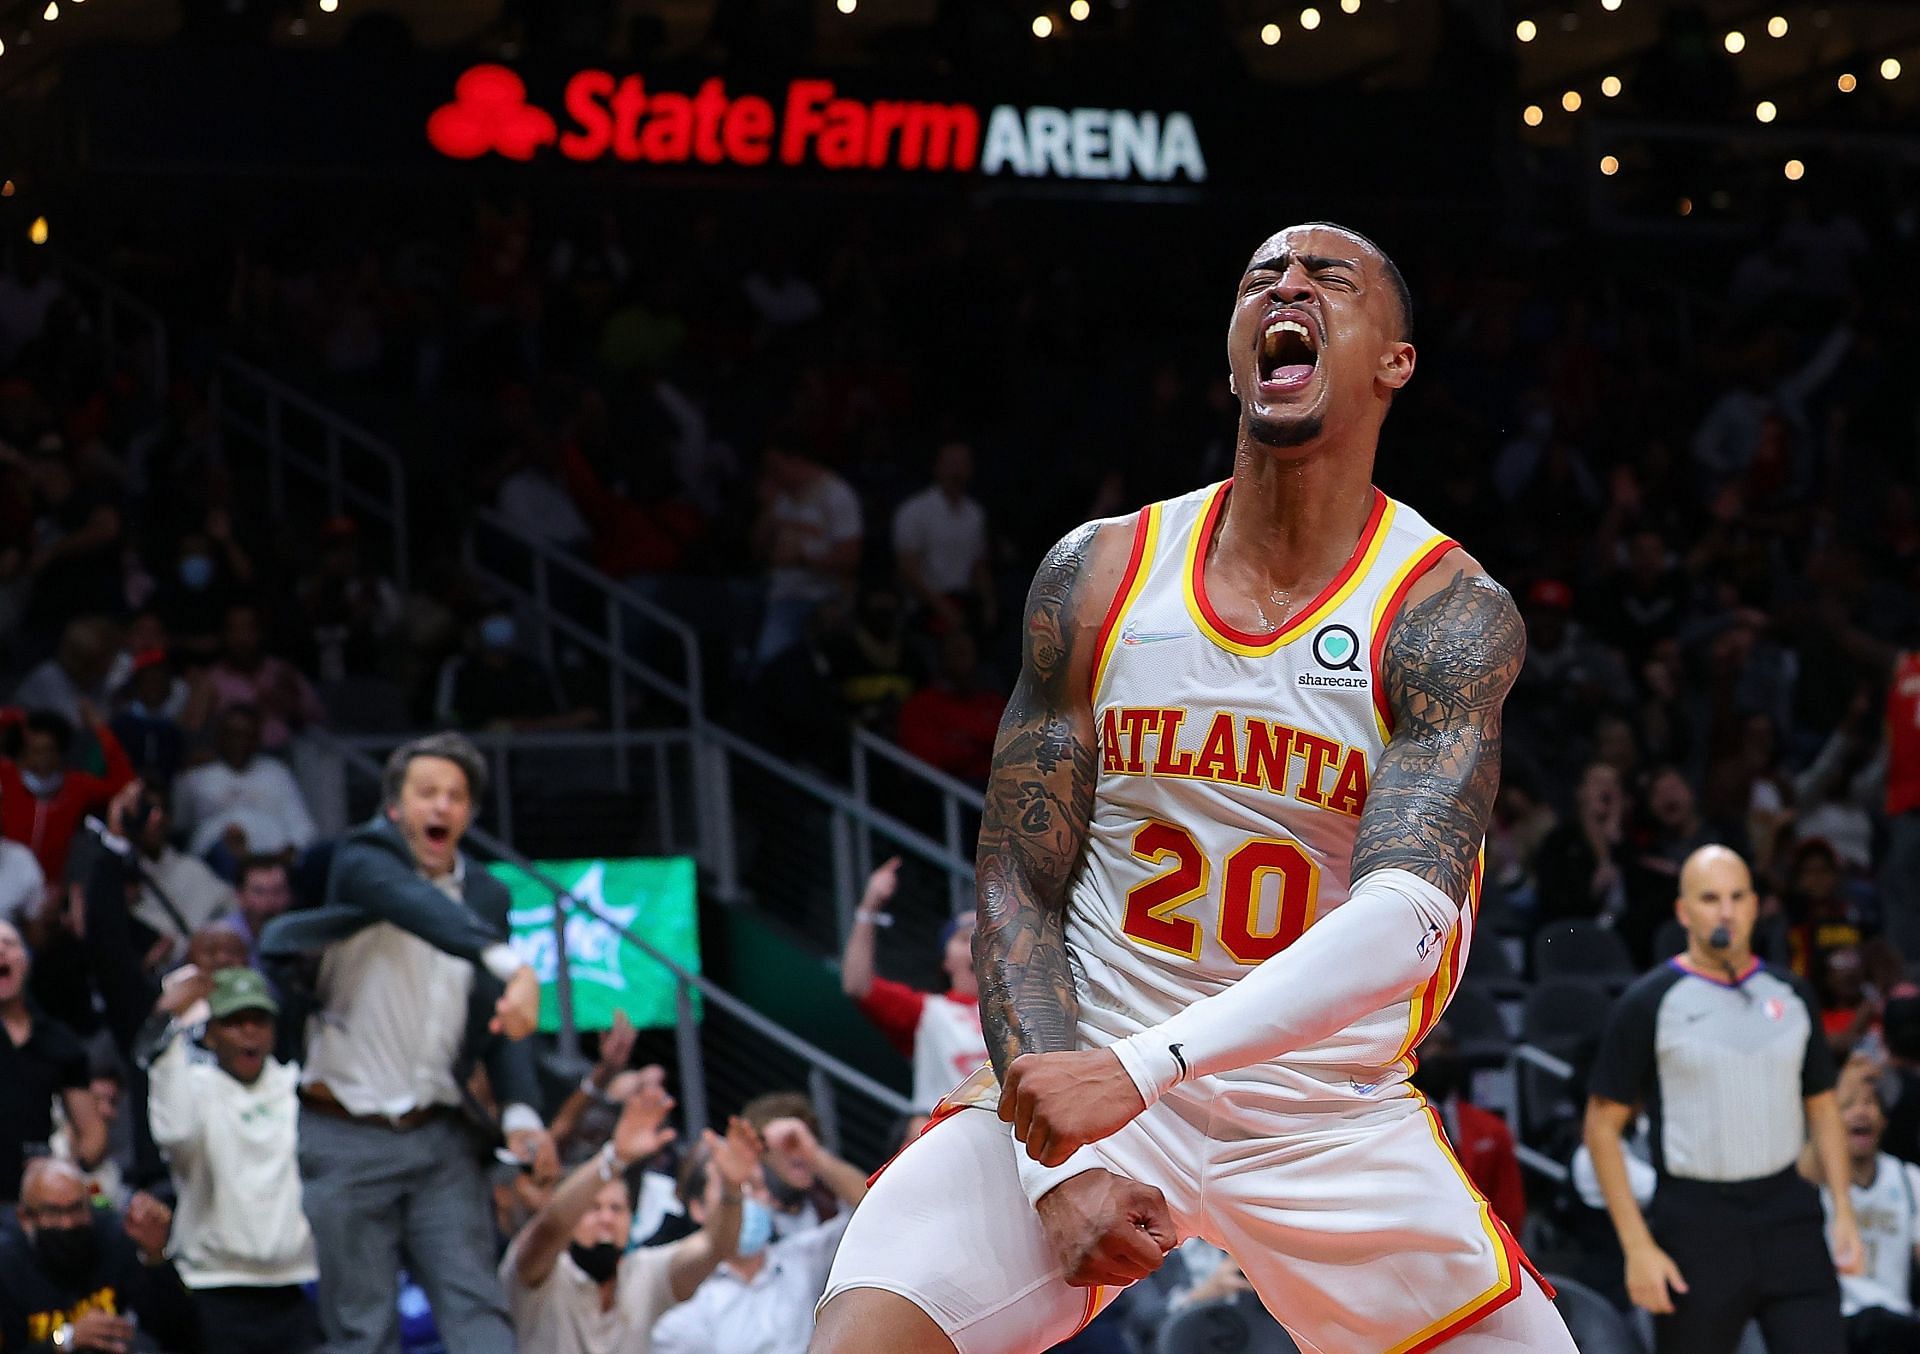 John Collins of the Atlanta Hawks reacts during a game.